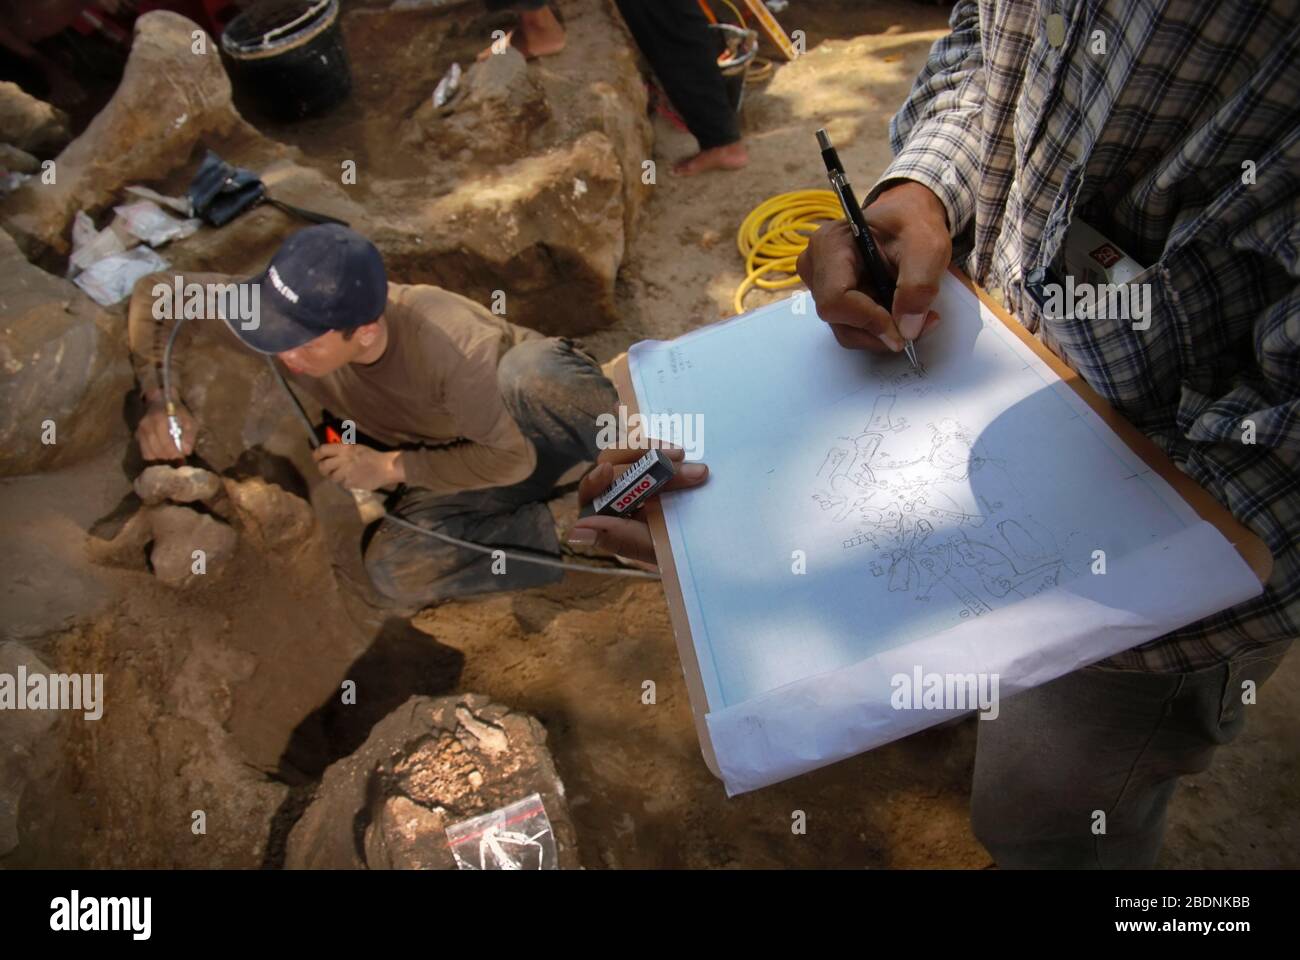 Paleontologist Iwan Kurniawan is making a sketch to map fossils locations at Elephas hysudrindicus excavation site in Central Java, Indonesia. Stock Photo